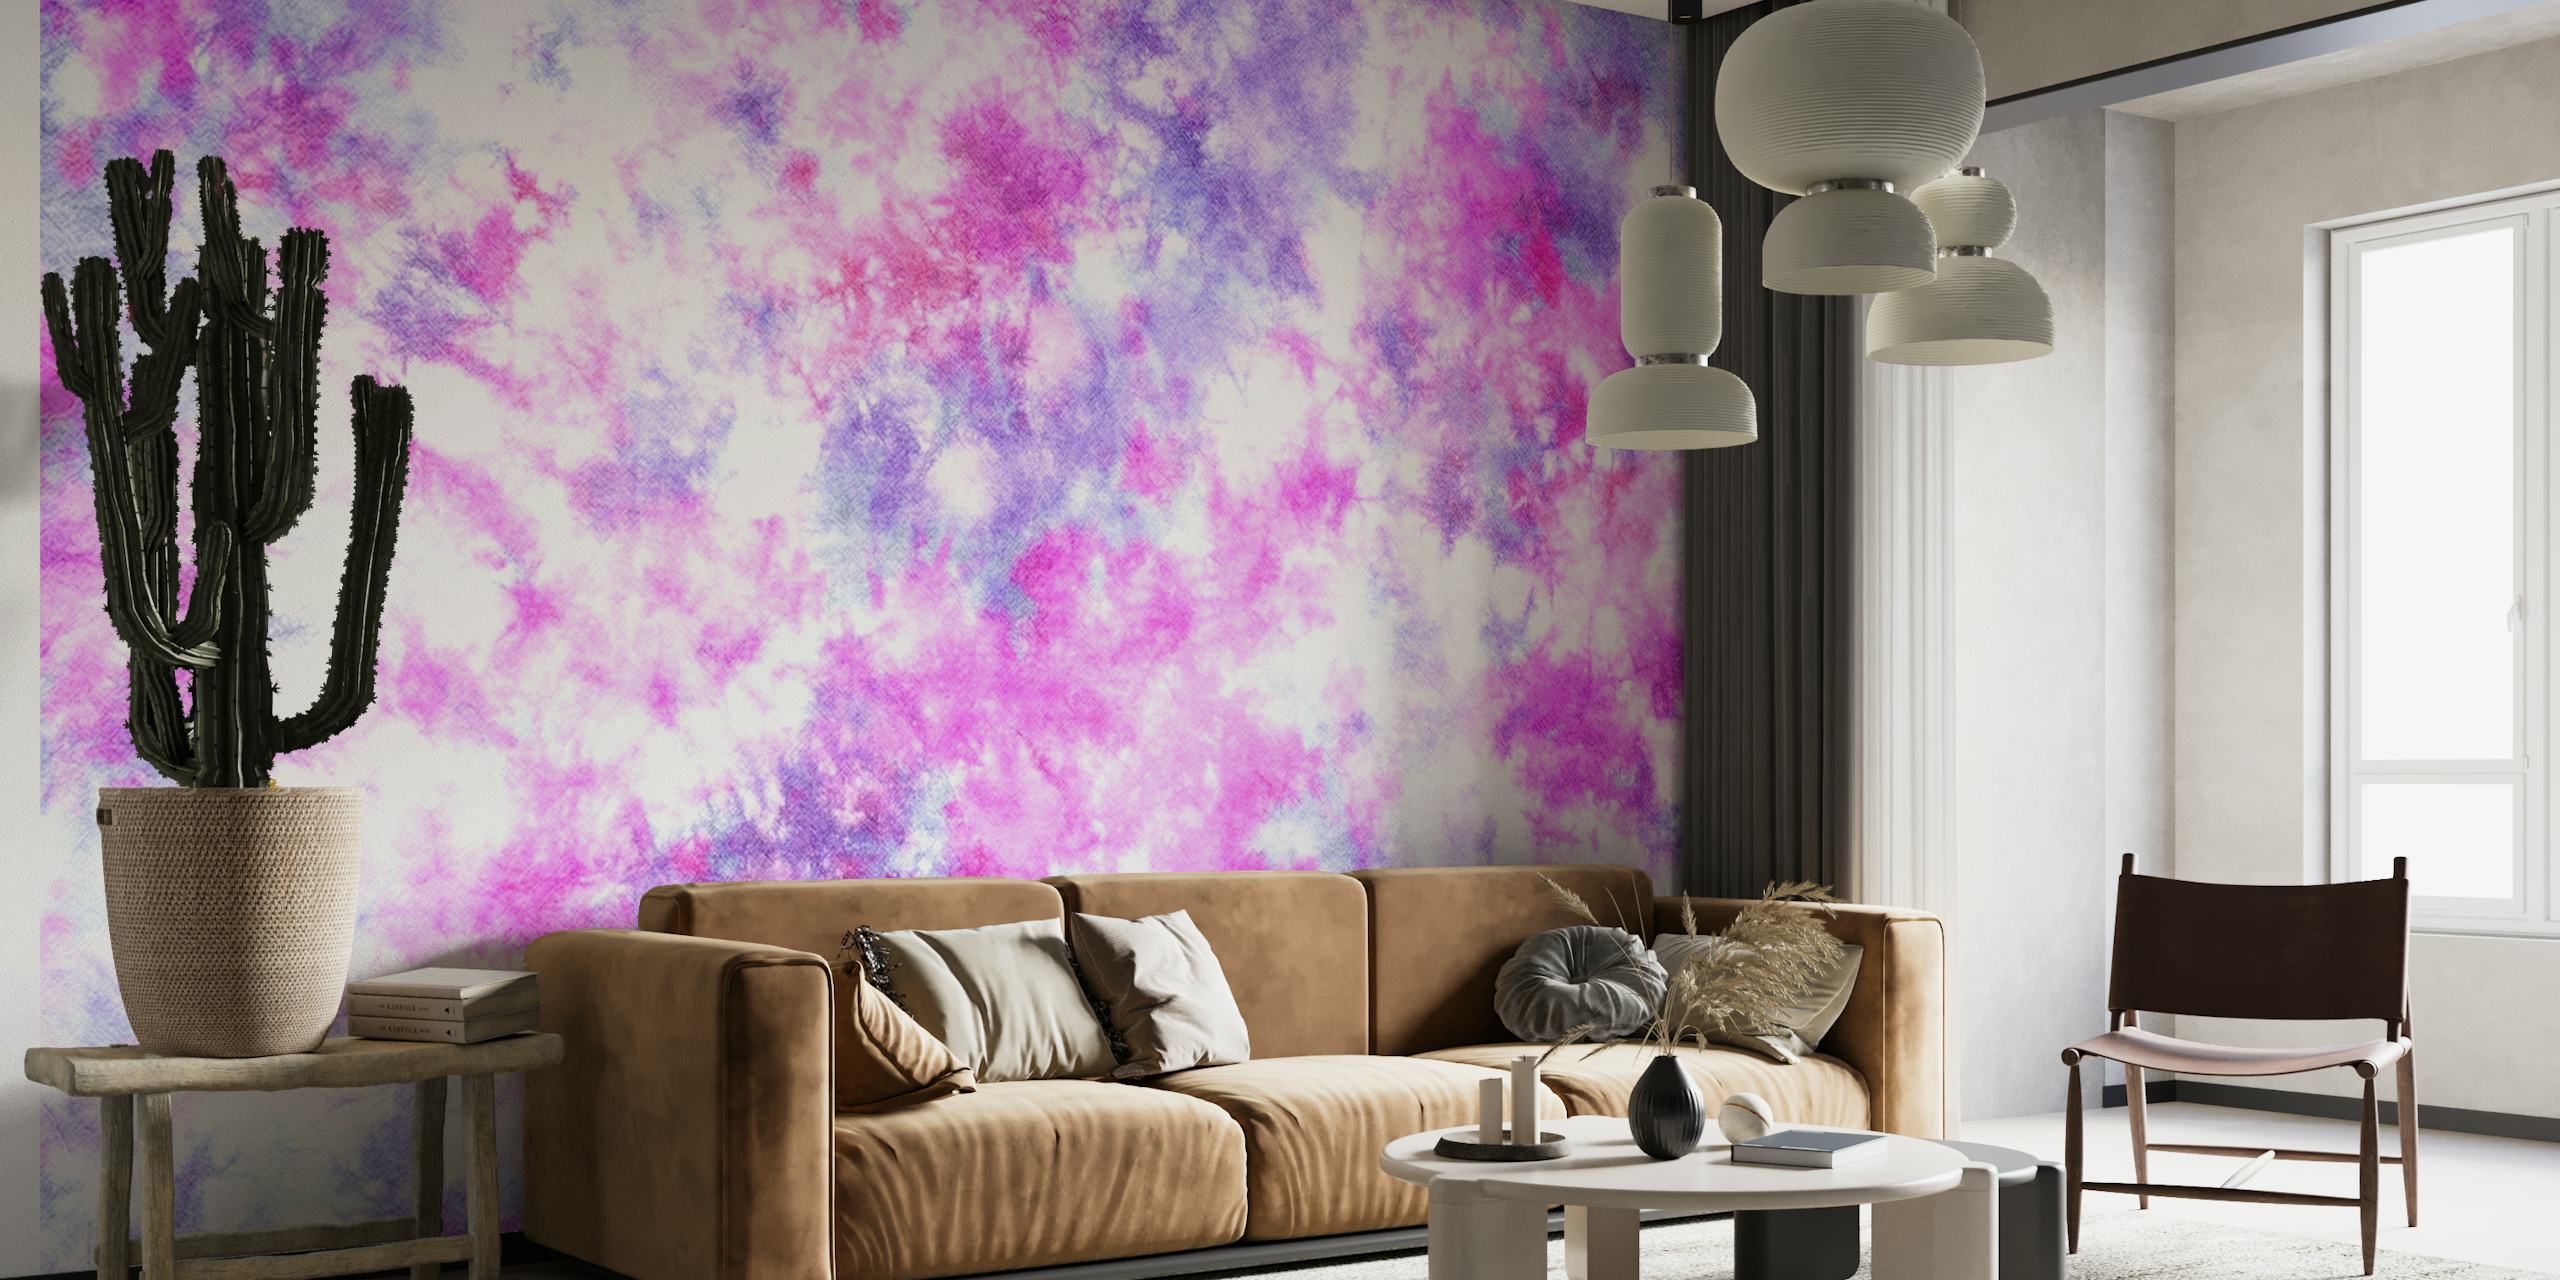 Purple and Pink Tie-Dye Background Wallpaper, Modern Home Decor